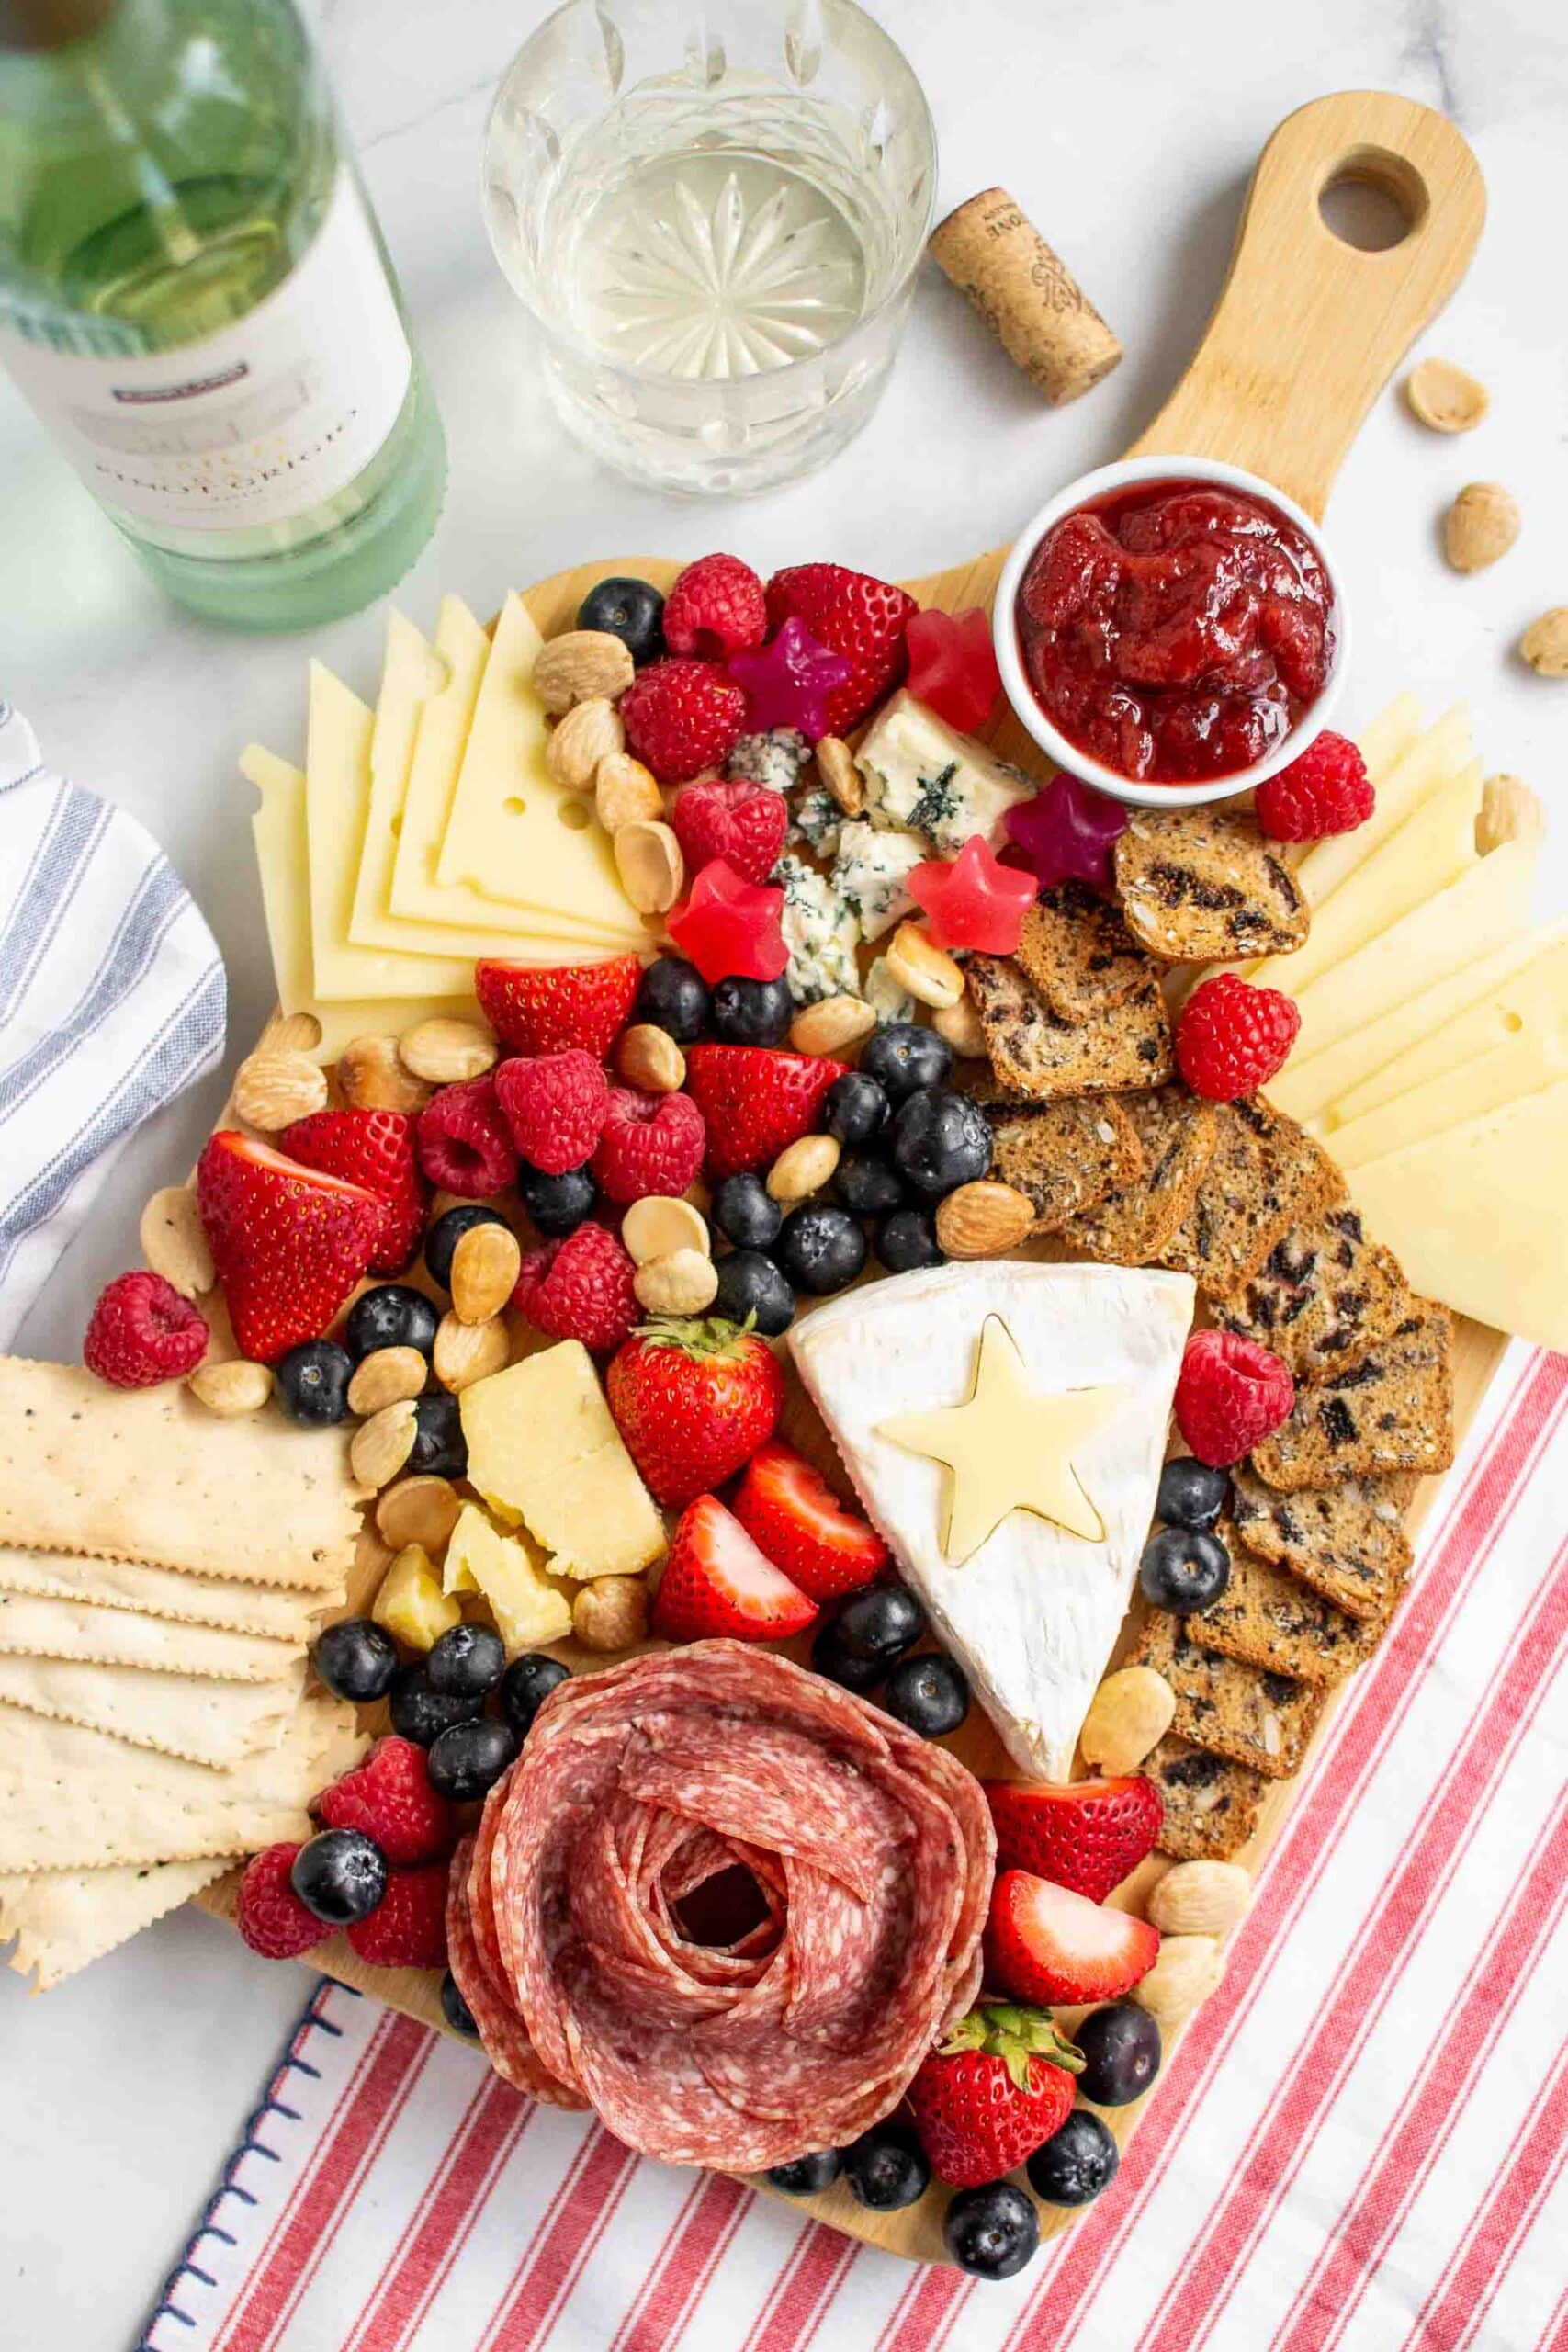 How To Make A Patriotic Charcuterie Board - Healthy Family Project